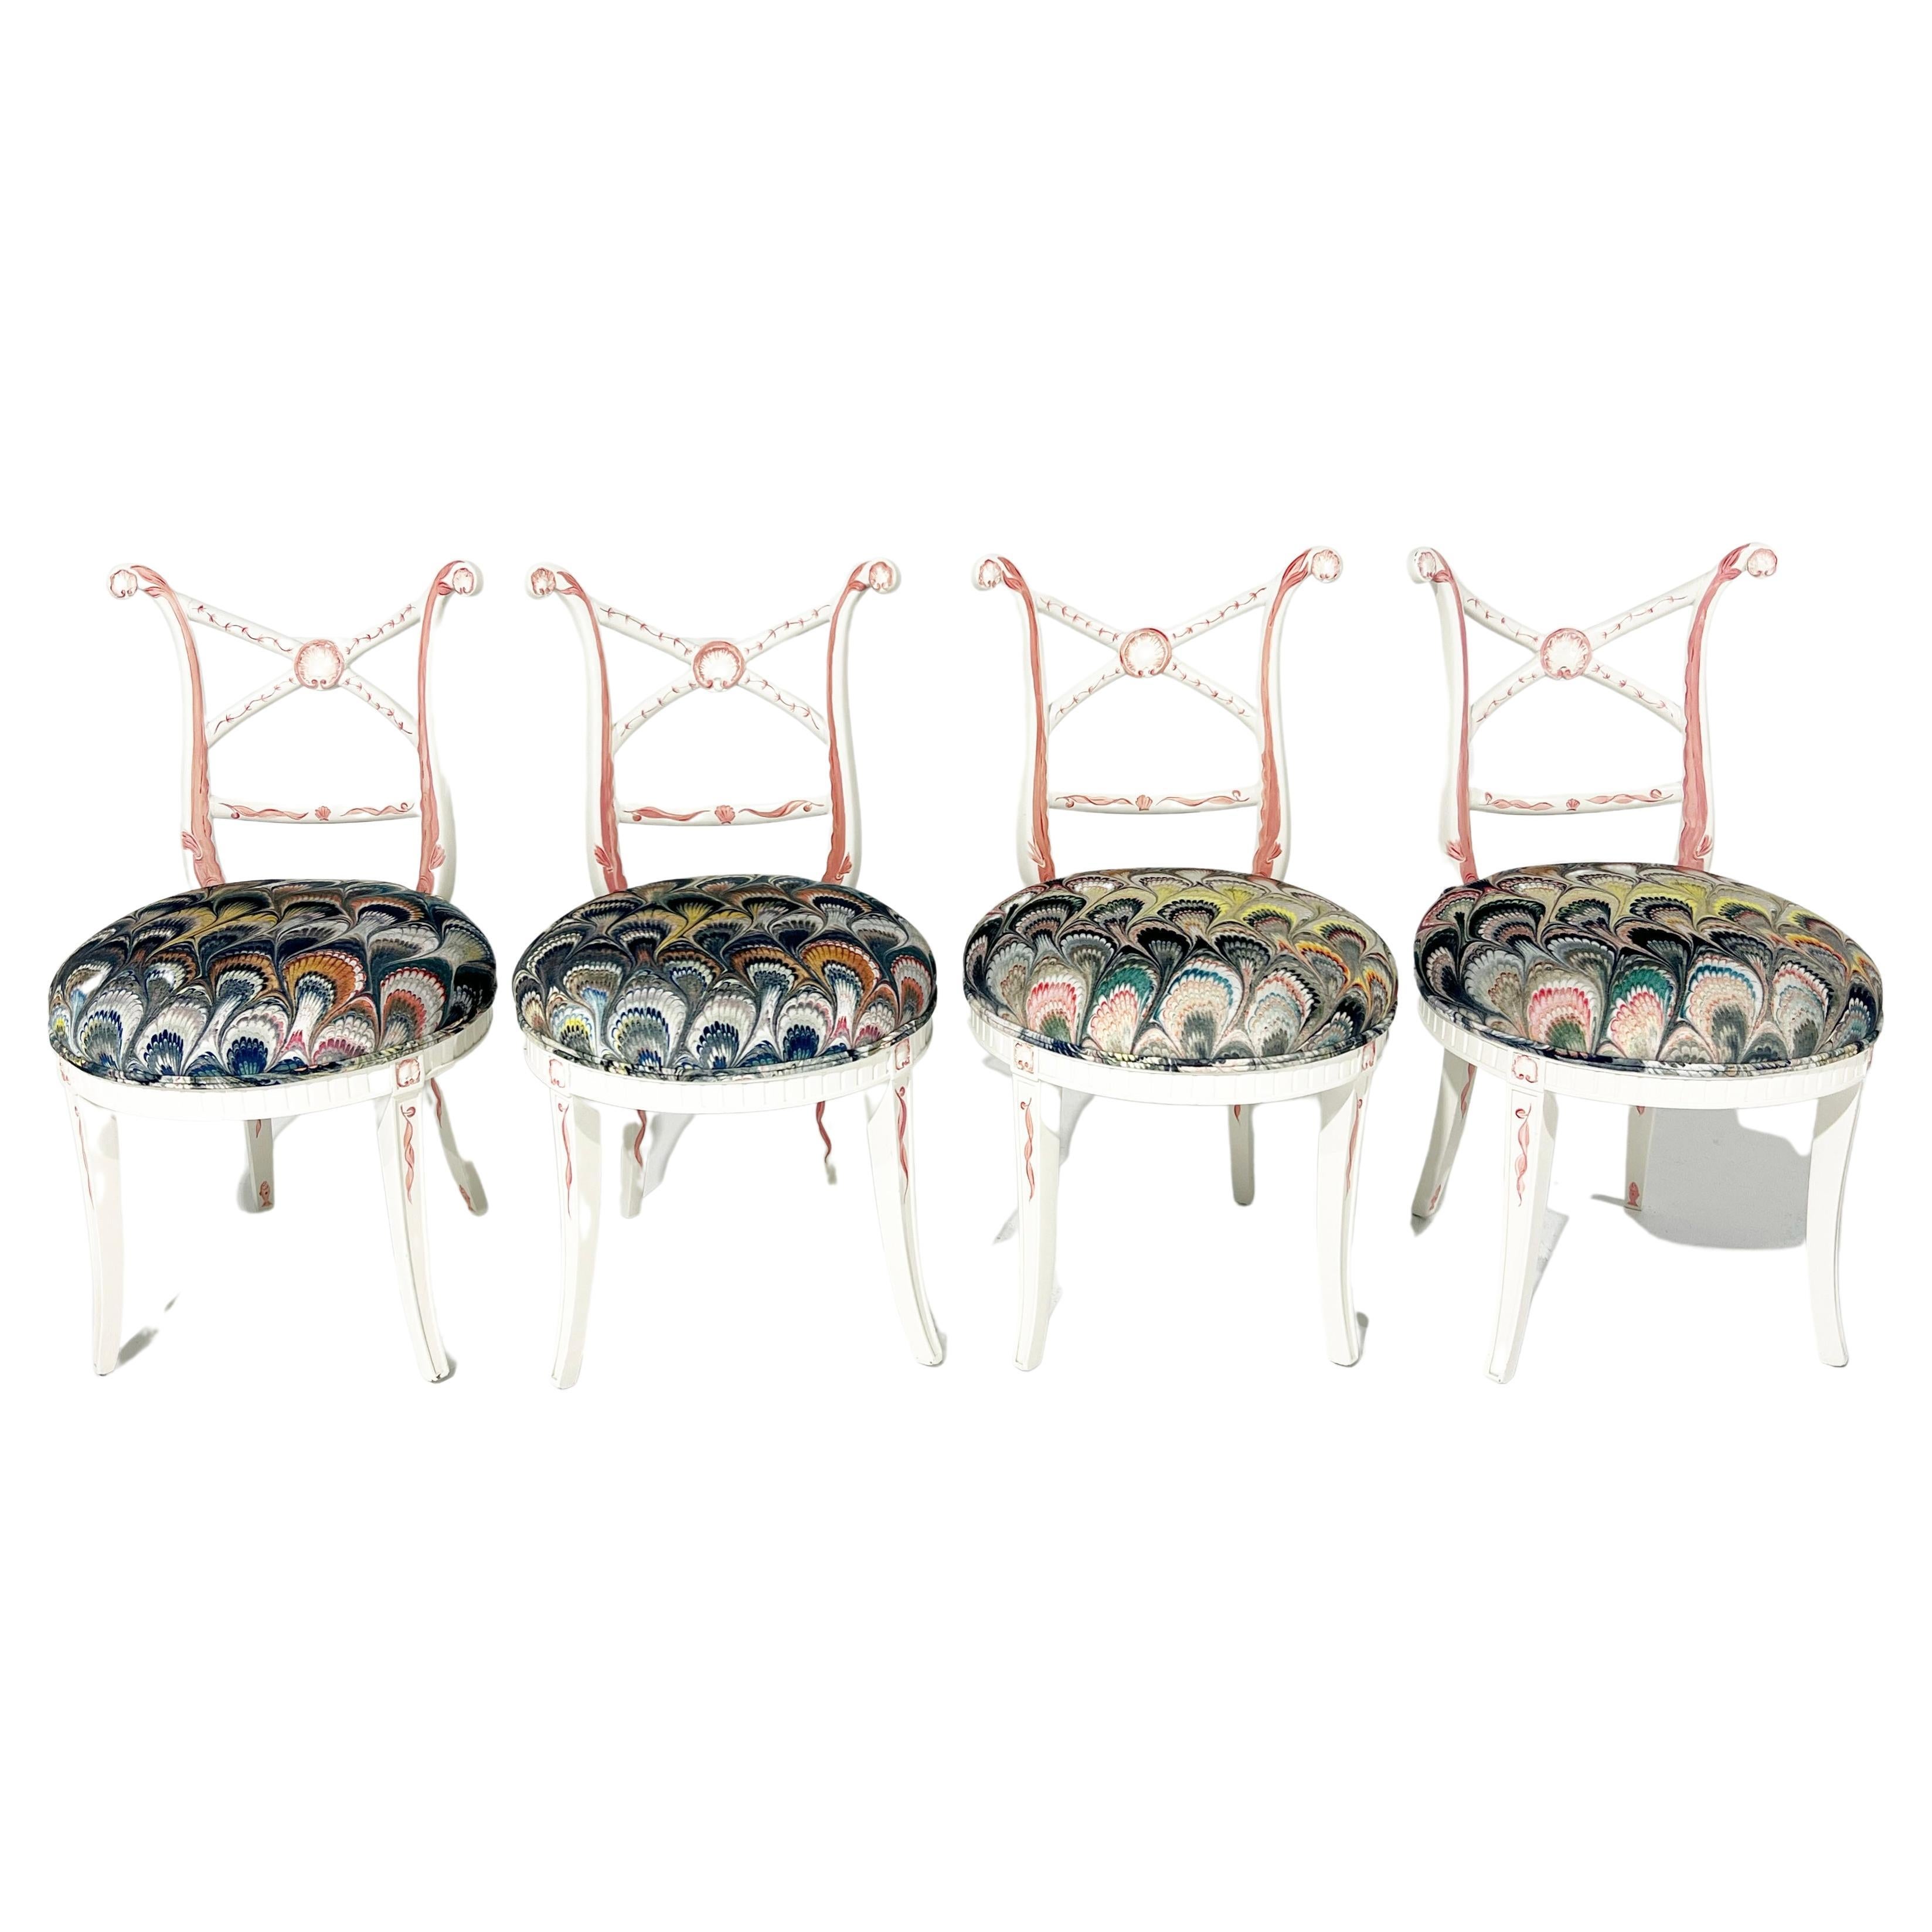 One-of-a-kind, Hand-Painted 'Sea Monsters' Chairs, Set of 4